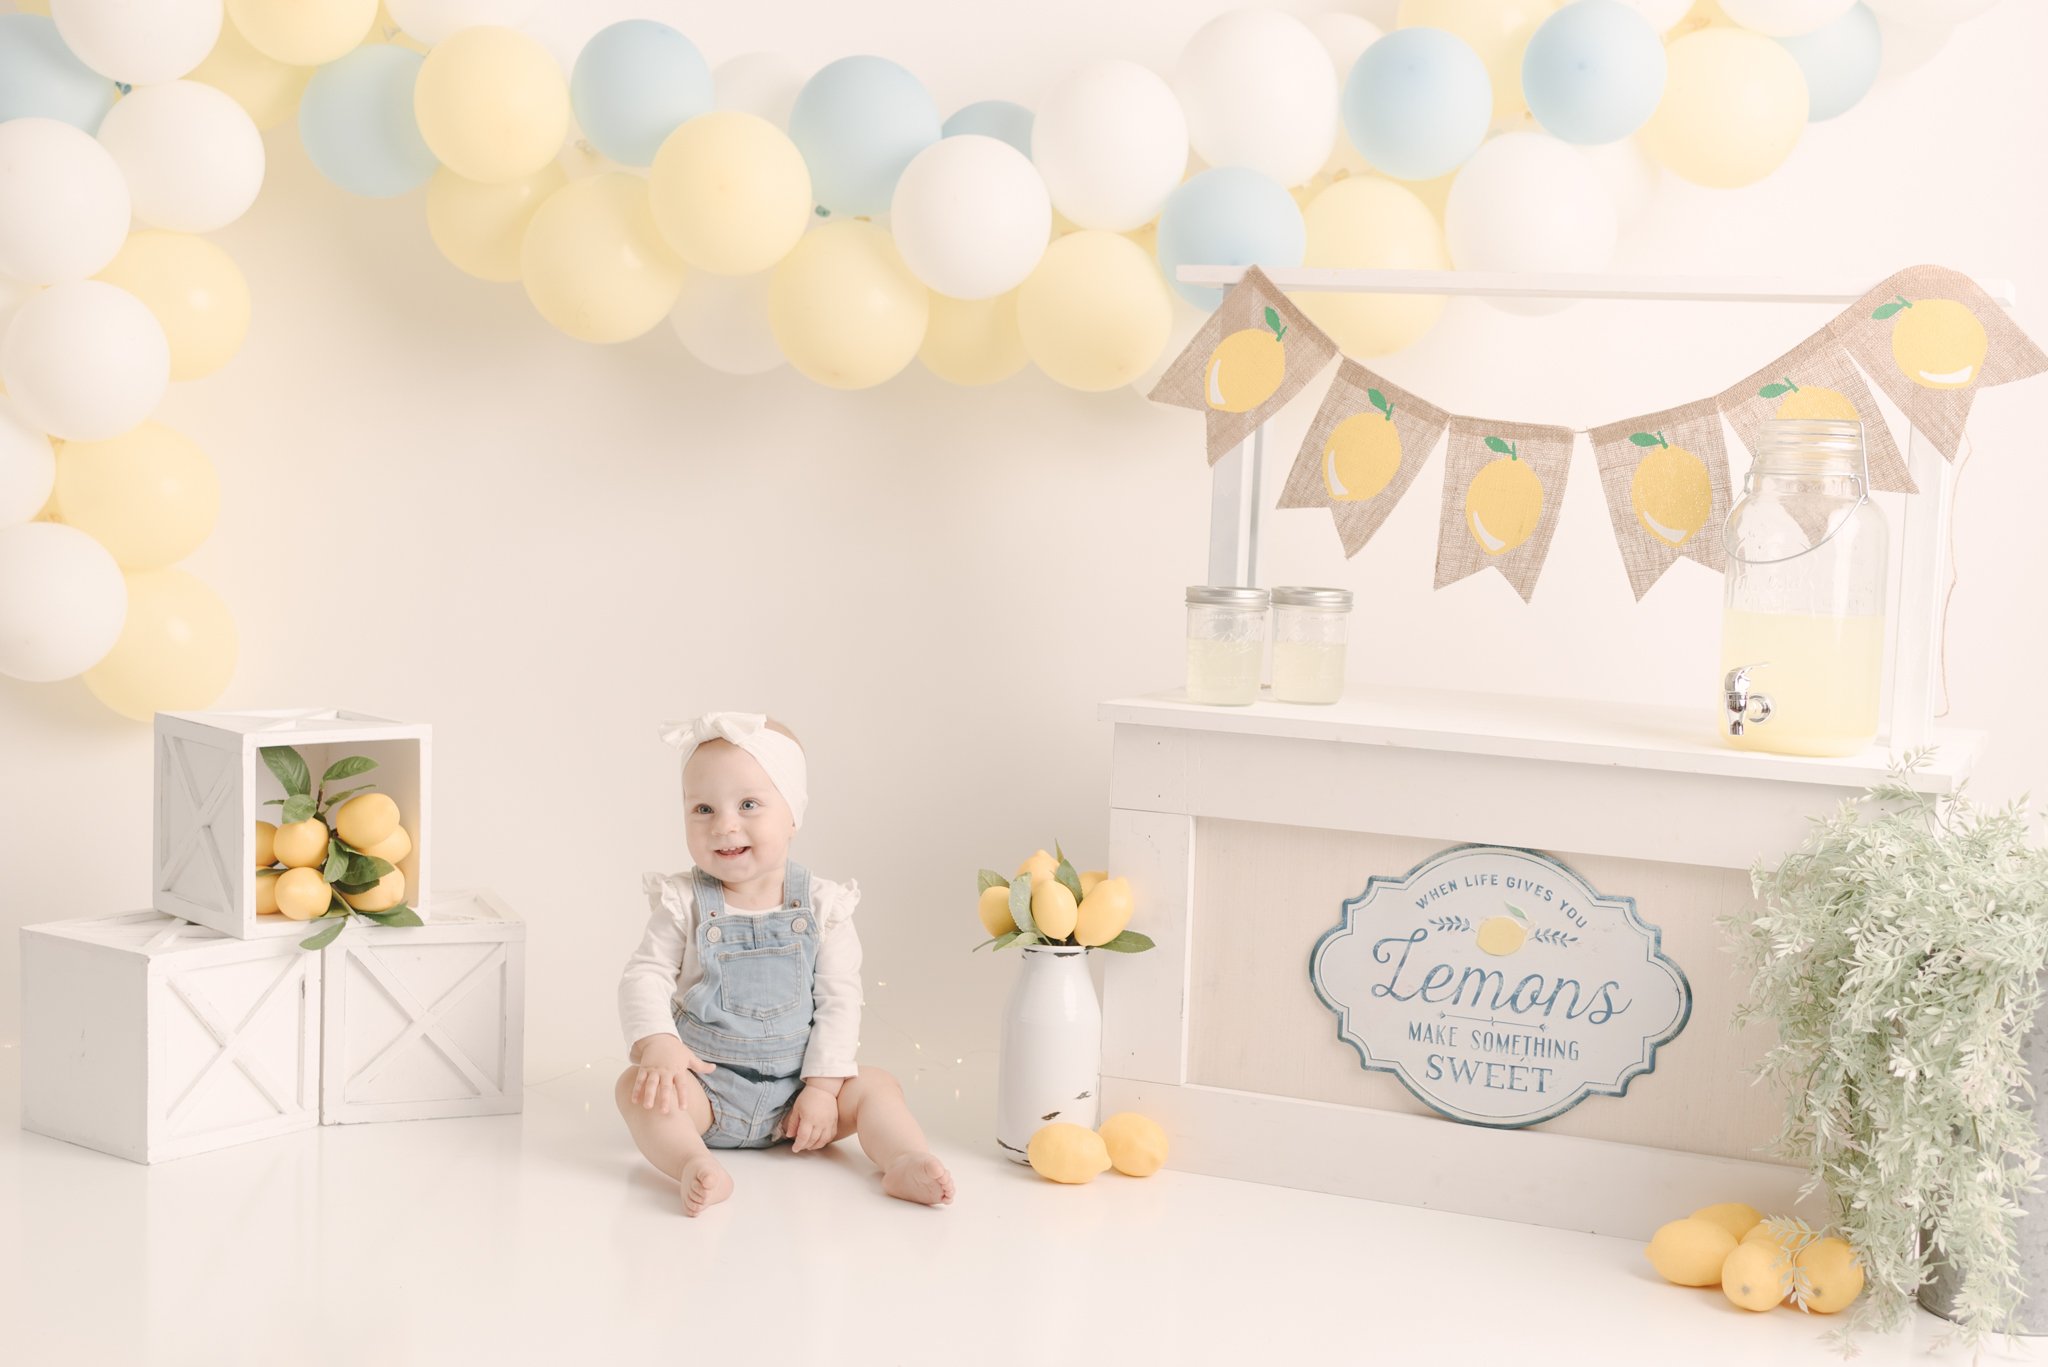 Lemonade_Stand_Frist_Birthday_Girl_Smash_and_Splash_Session_Cake_Studio_by_Erika_Child_and_Family_Photographer_for_Christie_Leigh_Photo_in_Warren_OH_Ohio_Trumbull_County_003.jpg